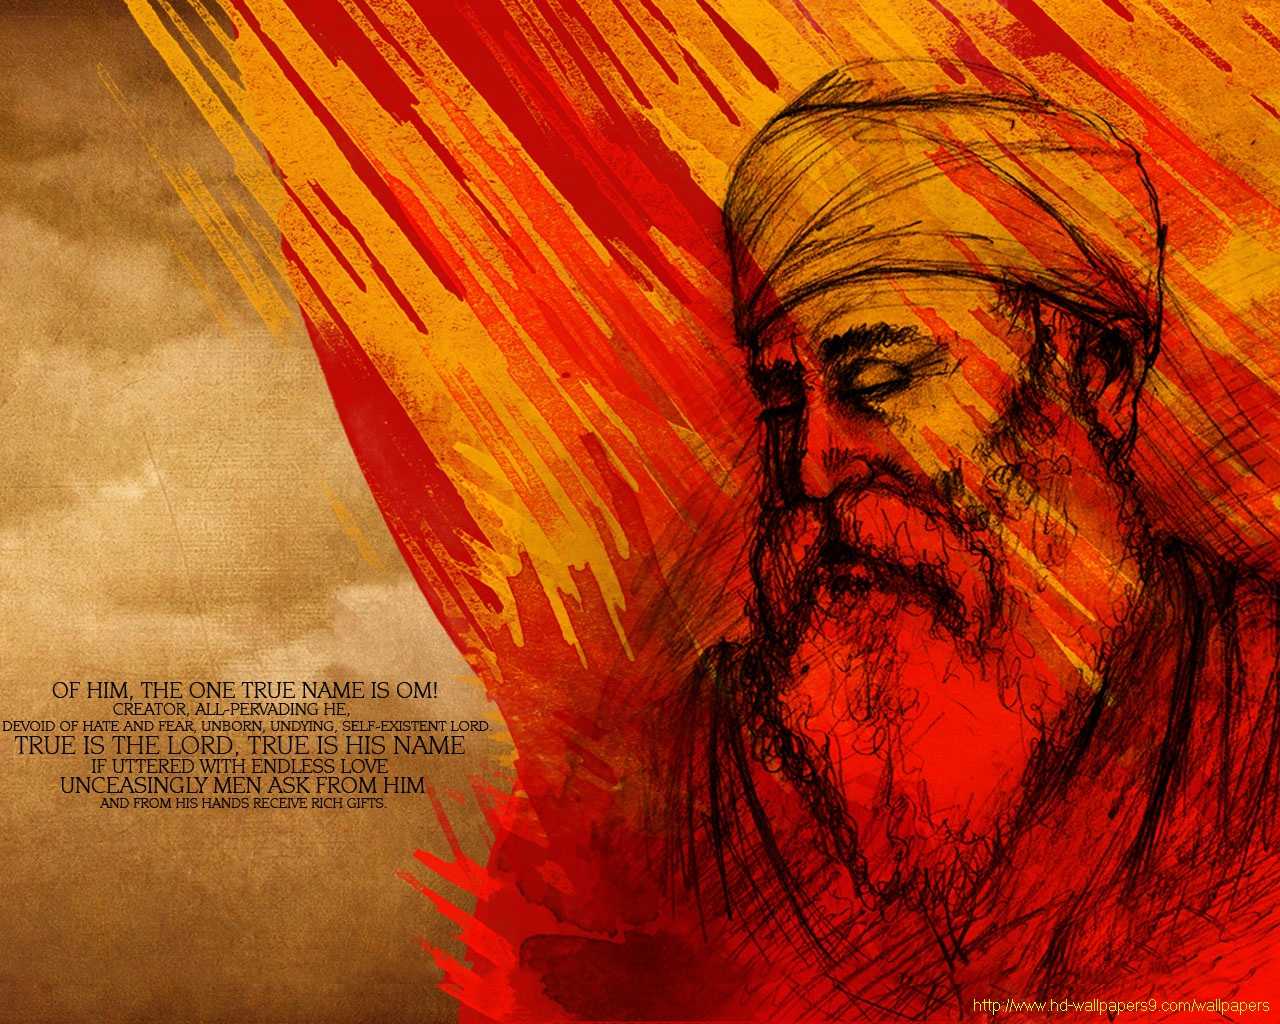  Sikhism Wallpapers Image Gallery Gods Sikhism Wallpapers wallpapers